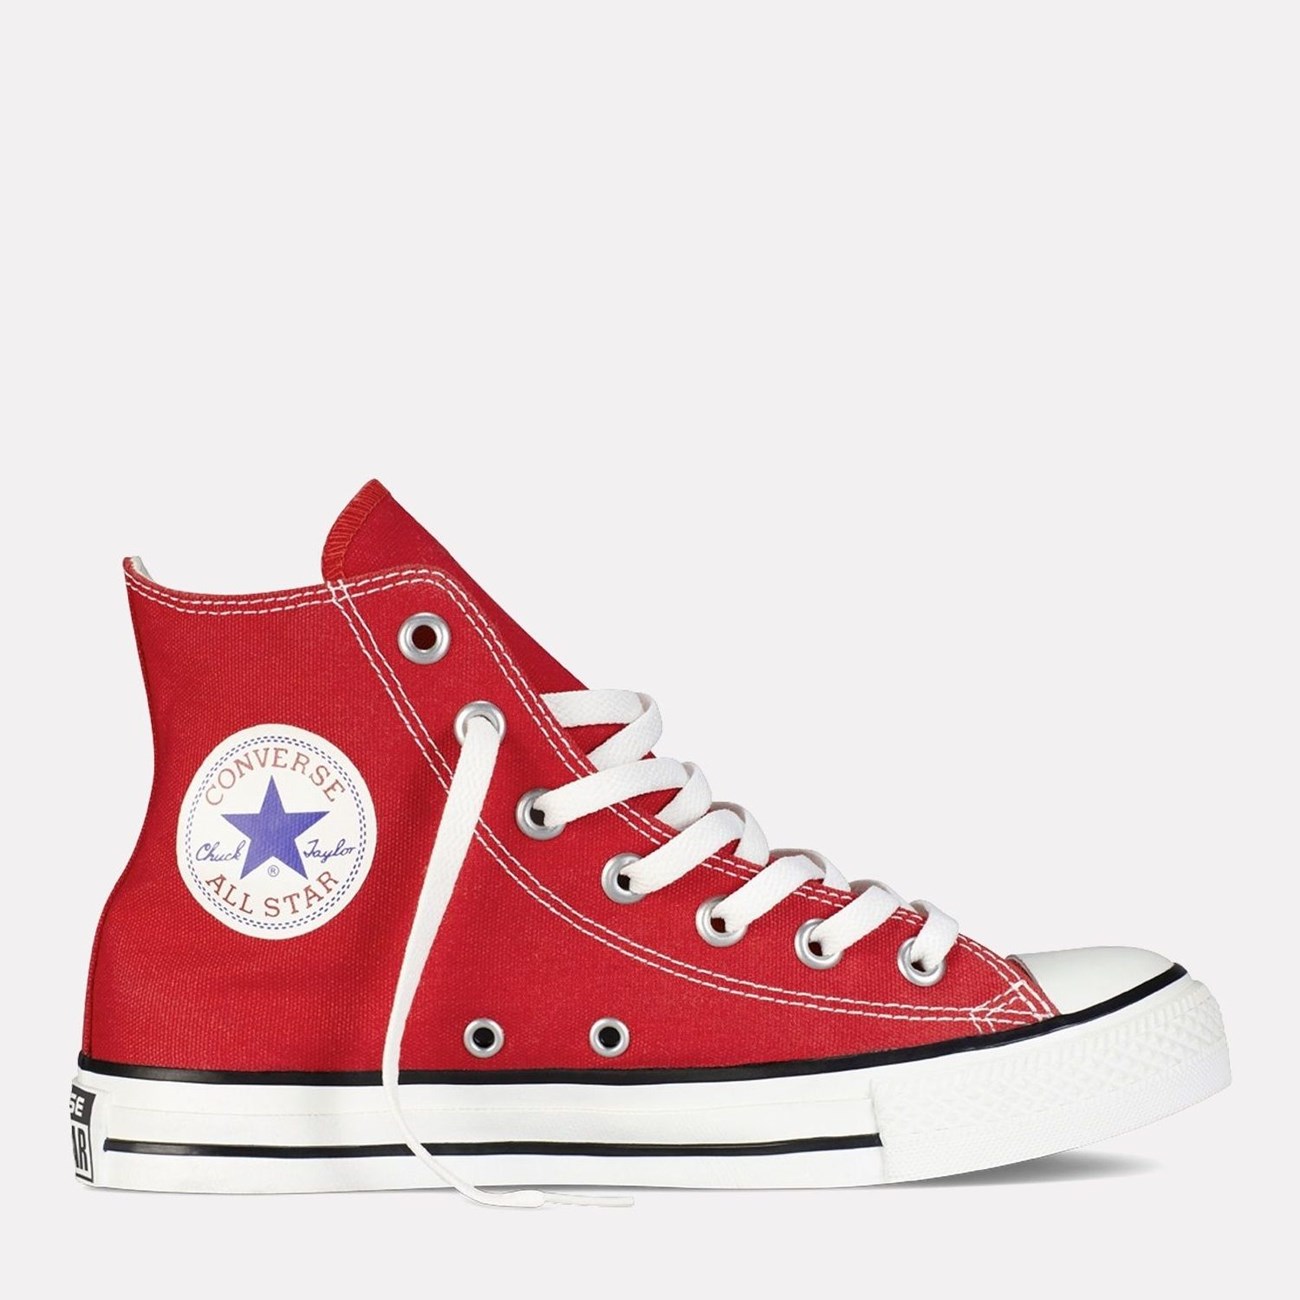 CONVERSE Unisex Sneakers Chuck Taylor All Star  M9621C - The Athlete's Foot